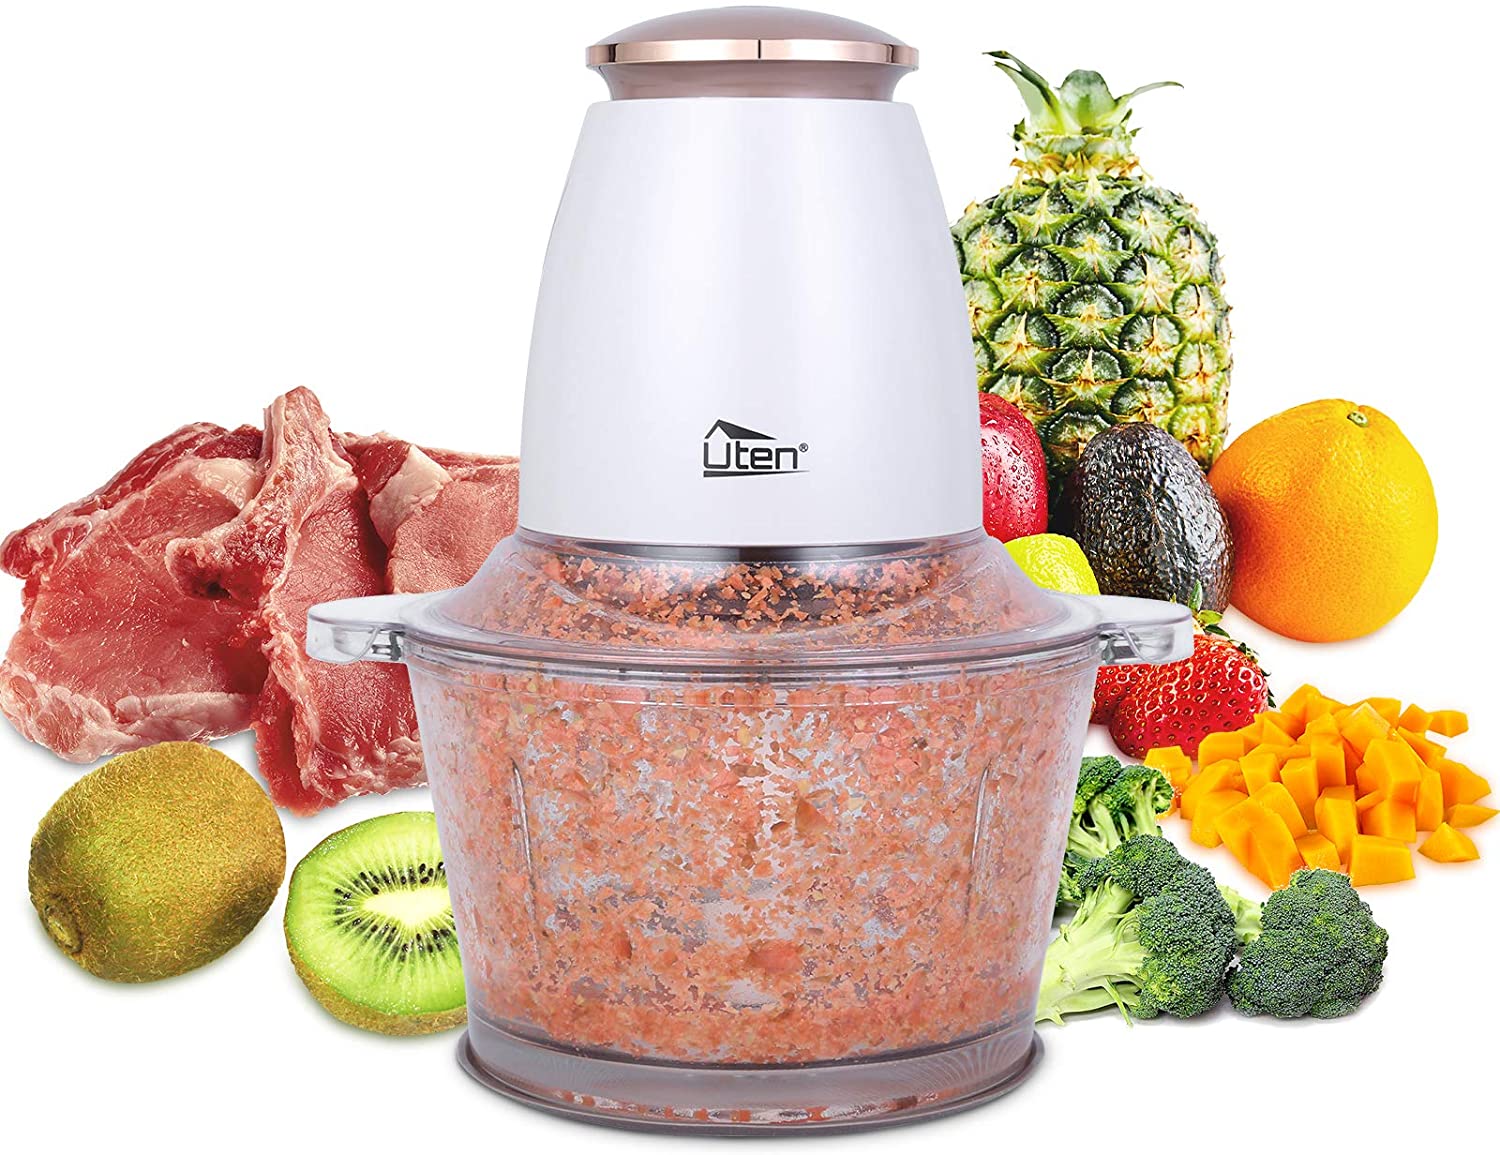 Electric Uten 400 W Elek Vegetable Cutter / Onion Cutter / 1.5 L Glass Container / Pulse / Splashproof Meat Grinder with 4-Wing Stainless Steel Knife for Meat, Smoothies, Onions, Fruit, Vegetables